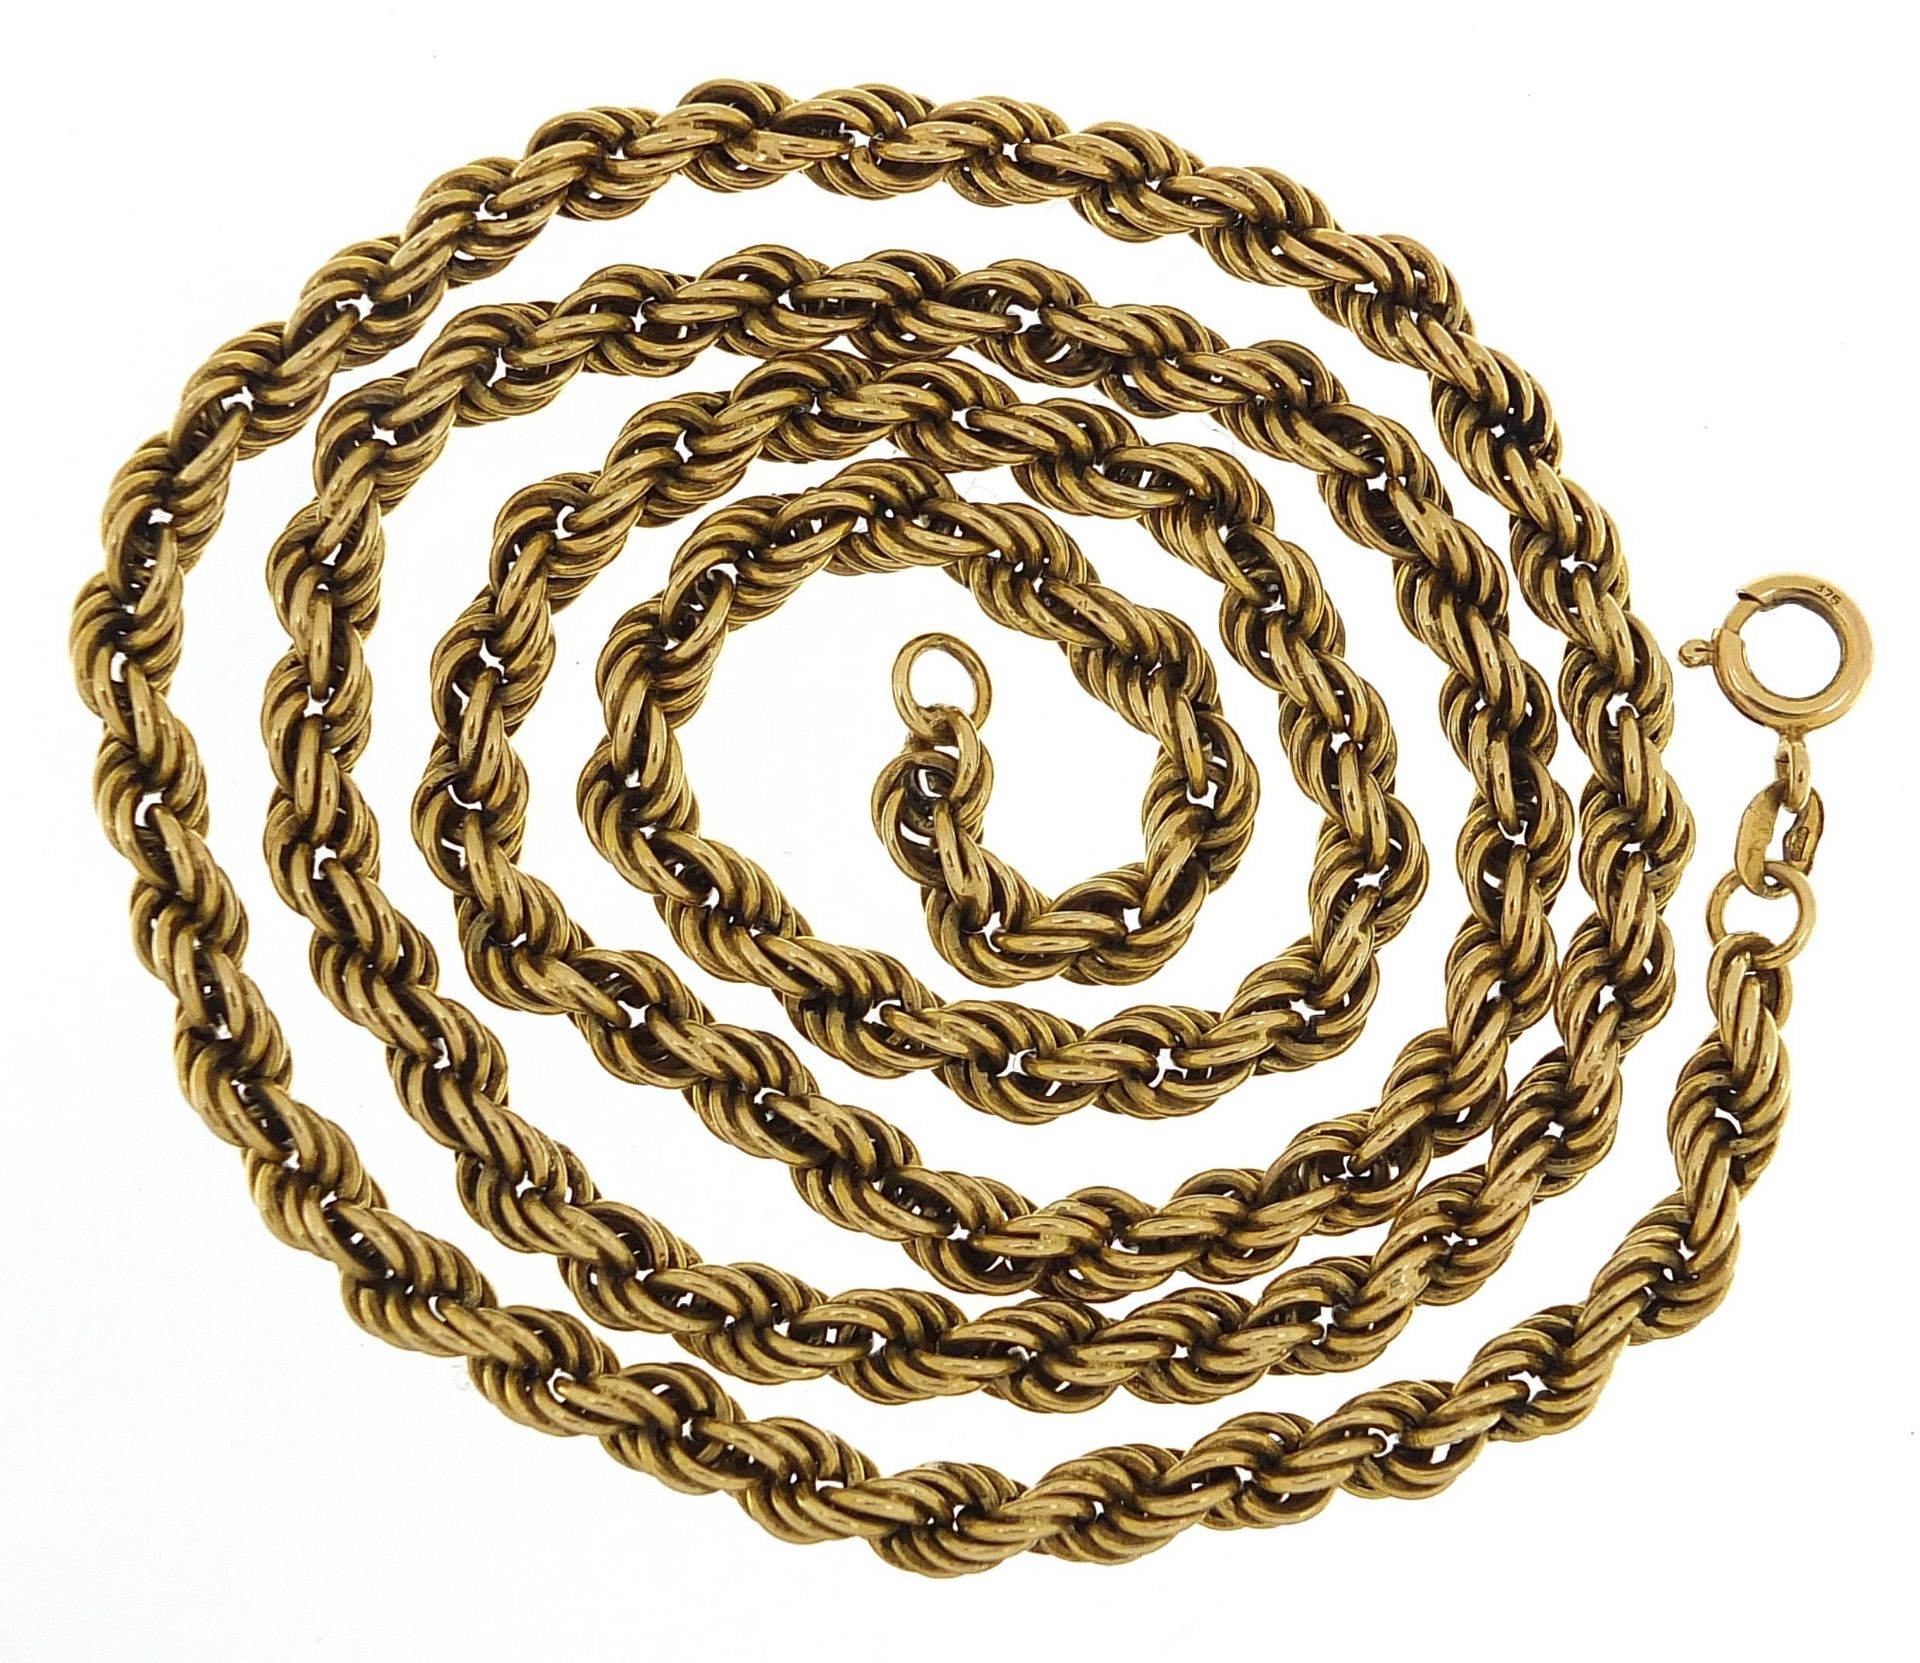 9ct gold rope twist necklace, 68cm in length, 21.6g - this lot is sold without buyer's premium - Image 2 of 3